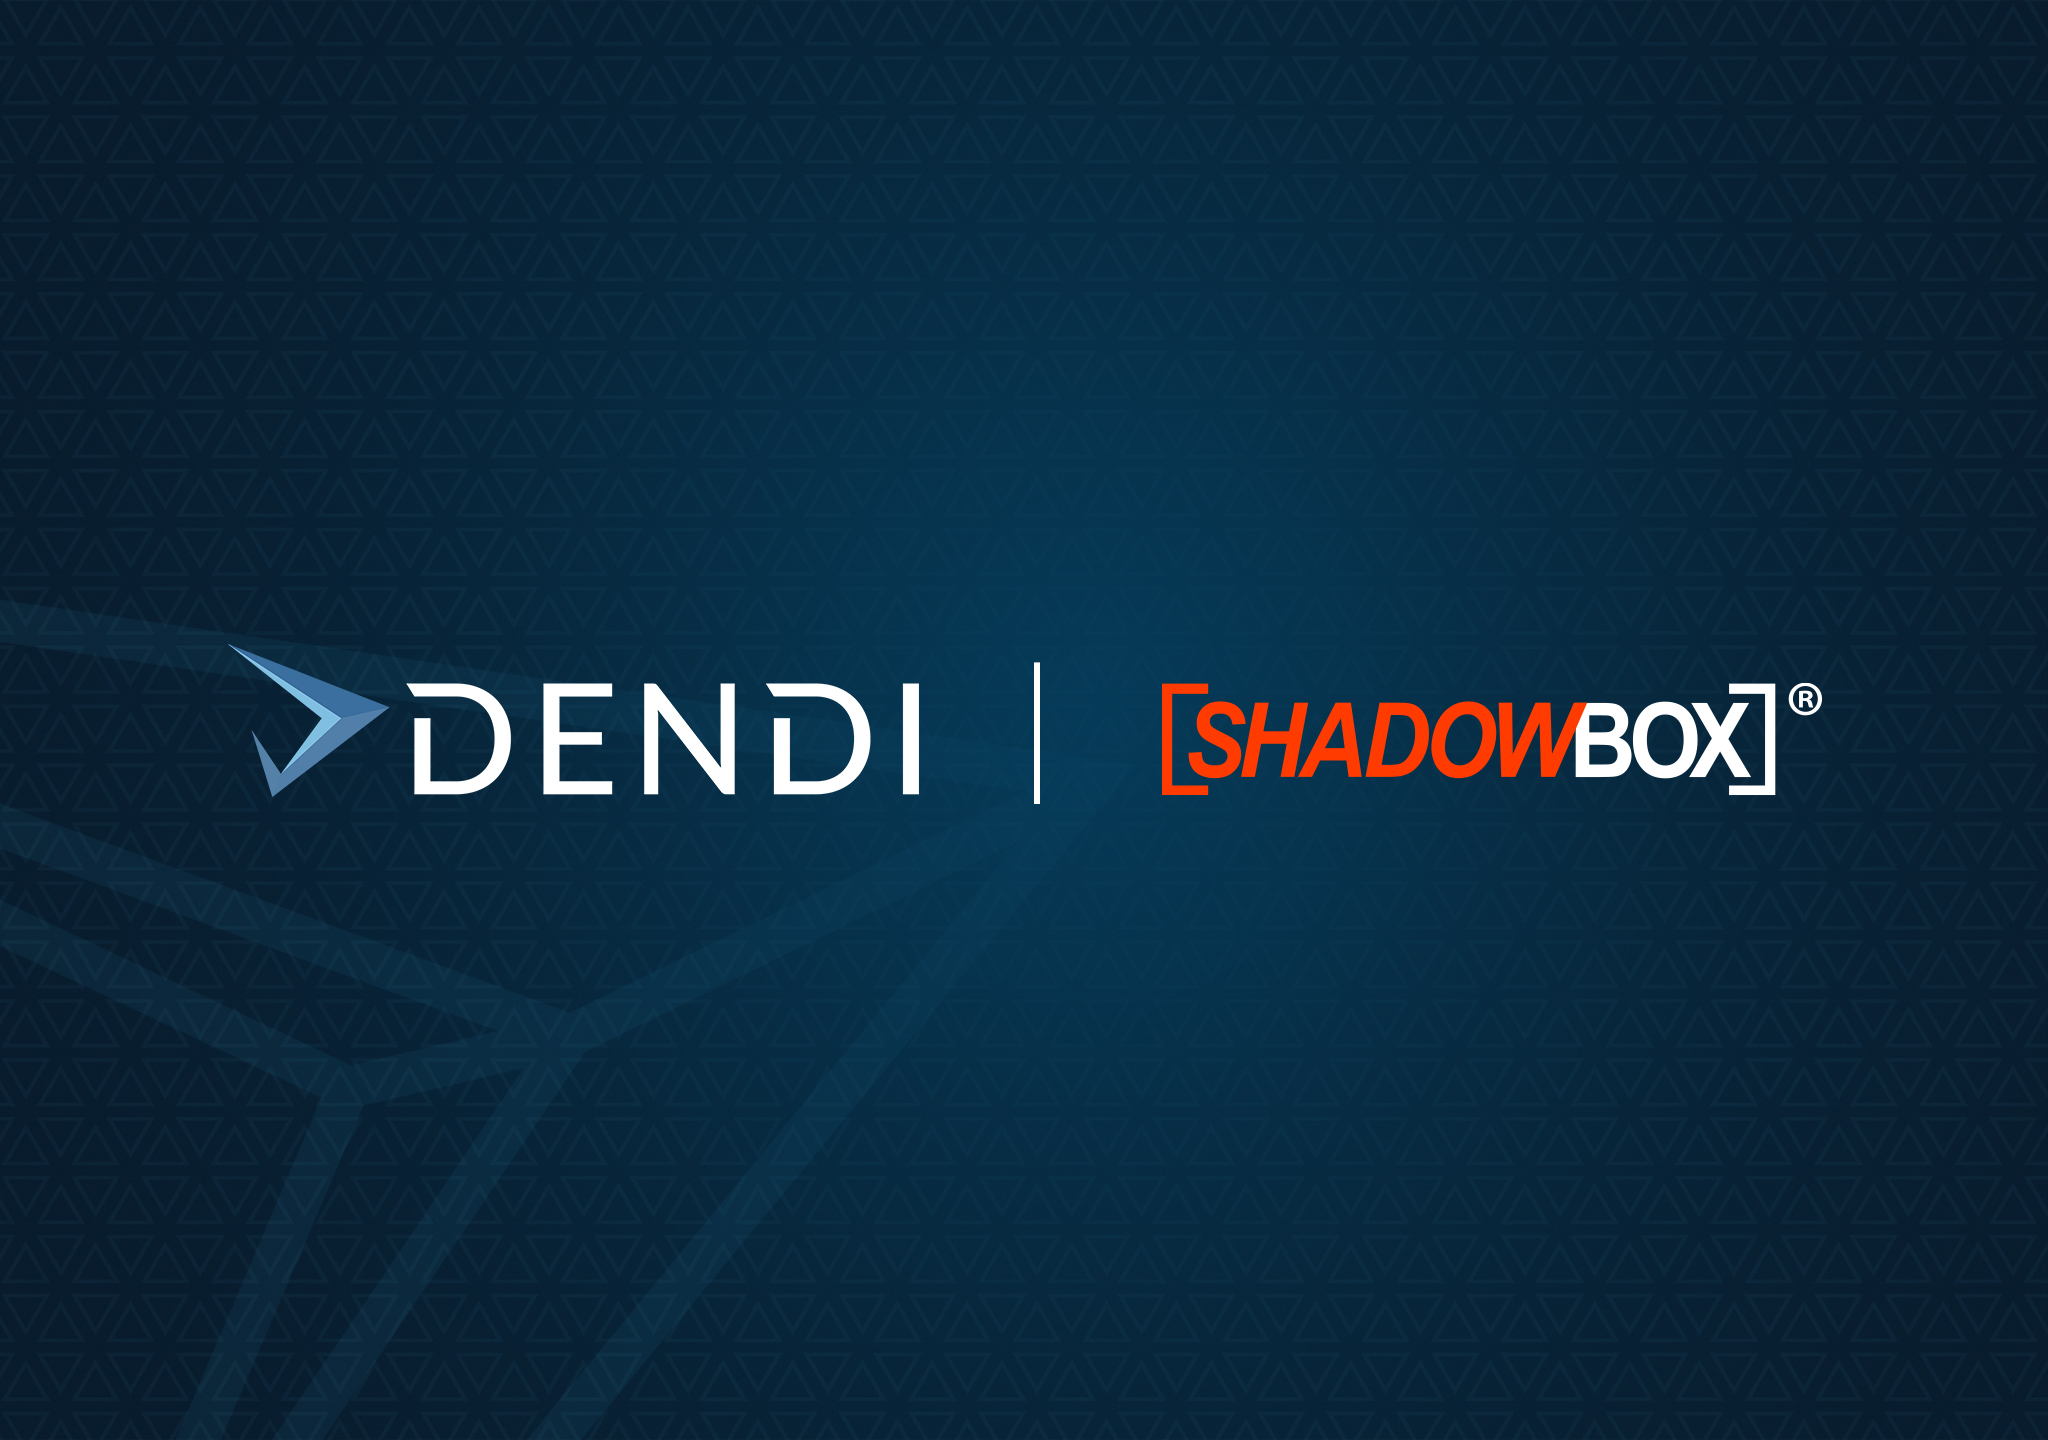 Dendi and Shadowbox Announce Partnership to Advance Workflow Automation in Clinical Labs